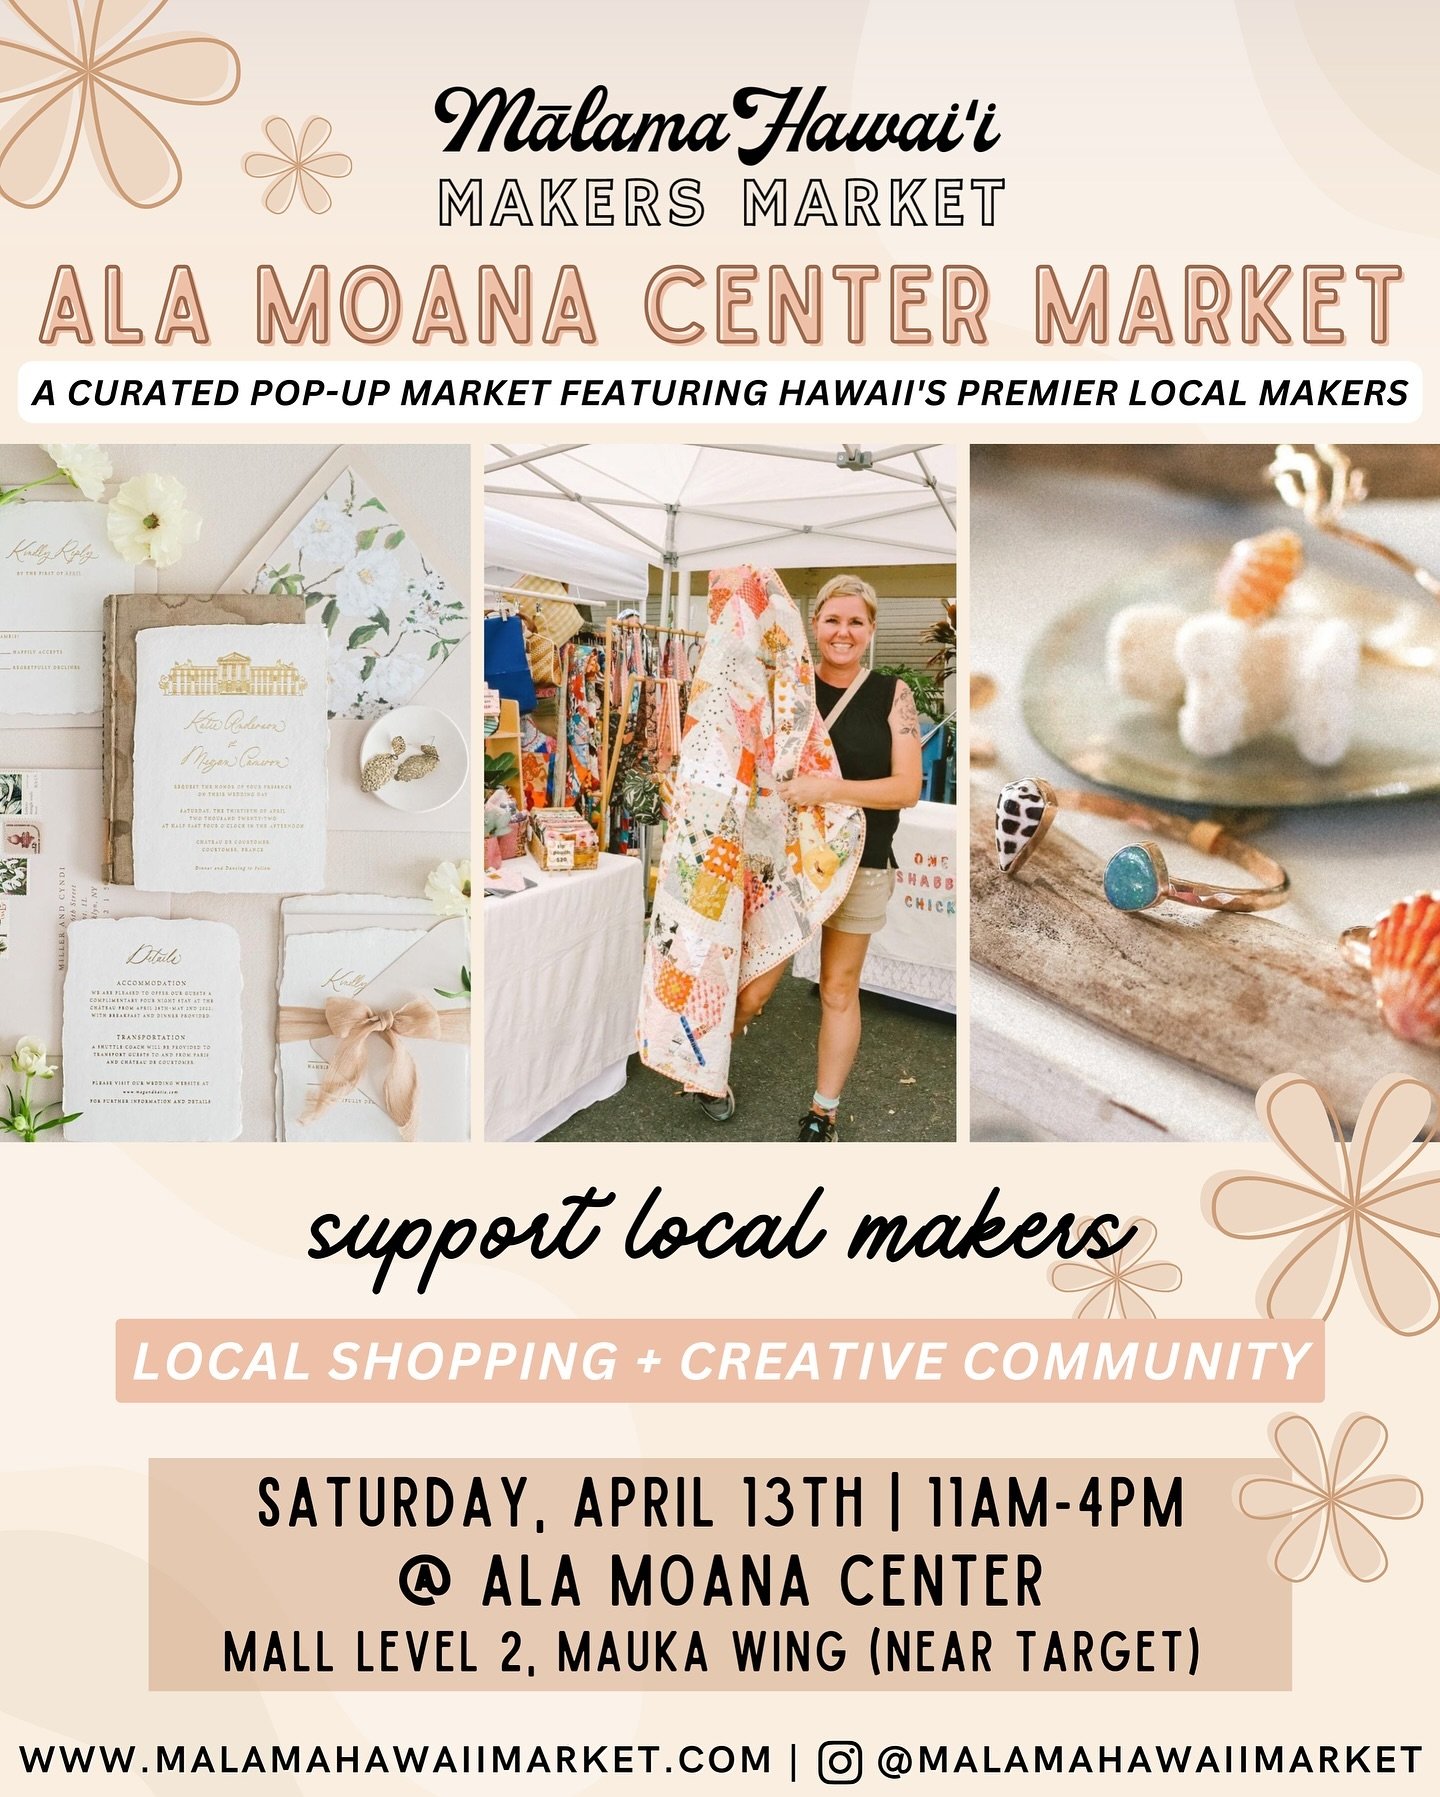 Our Ala Moana Center Market is up next, THIS SATURDAY &mdash; April 13th! 💕💐

Our Ala Moana Center location is our largest market of the month that features over 50 makers, artists, designers, and creative craftspeople showcasing their unique, high